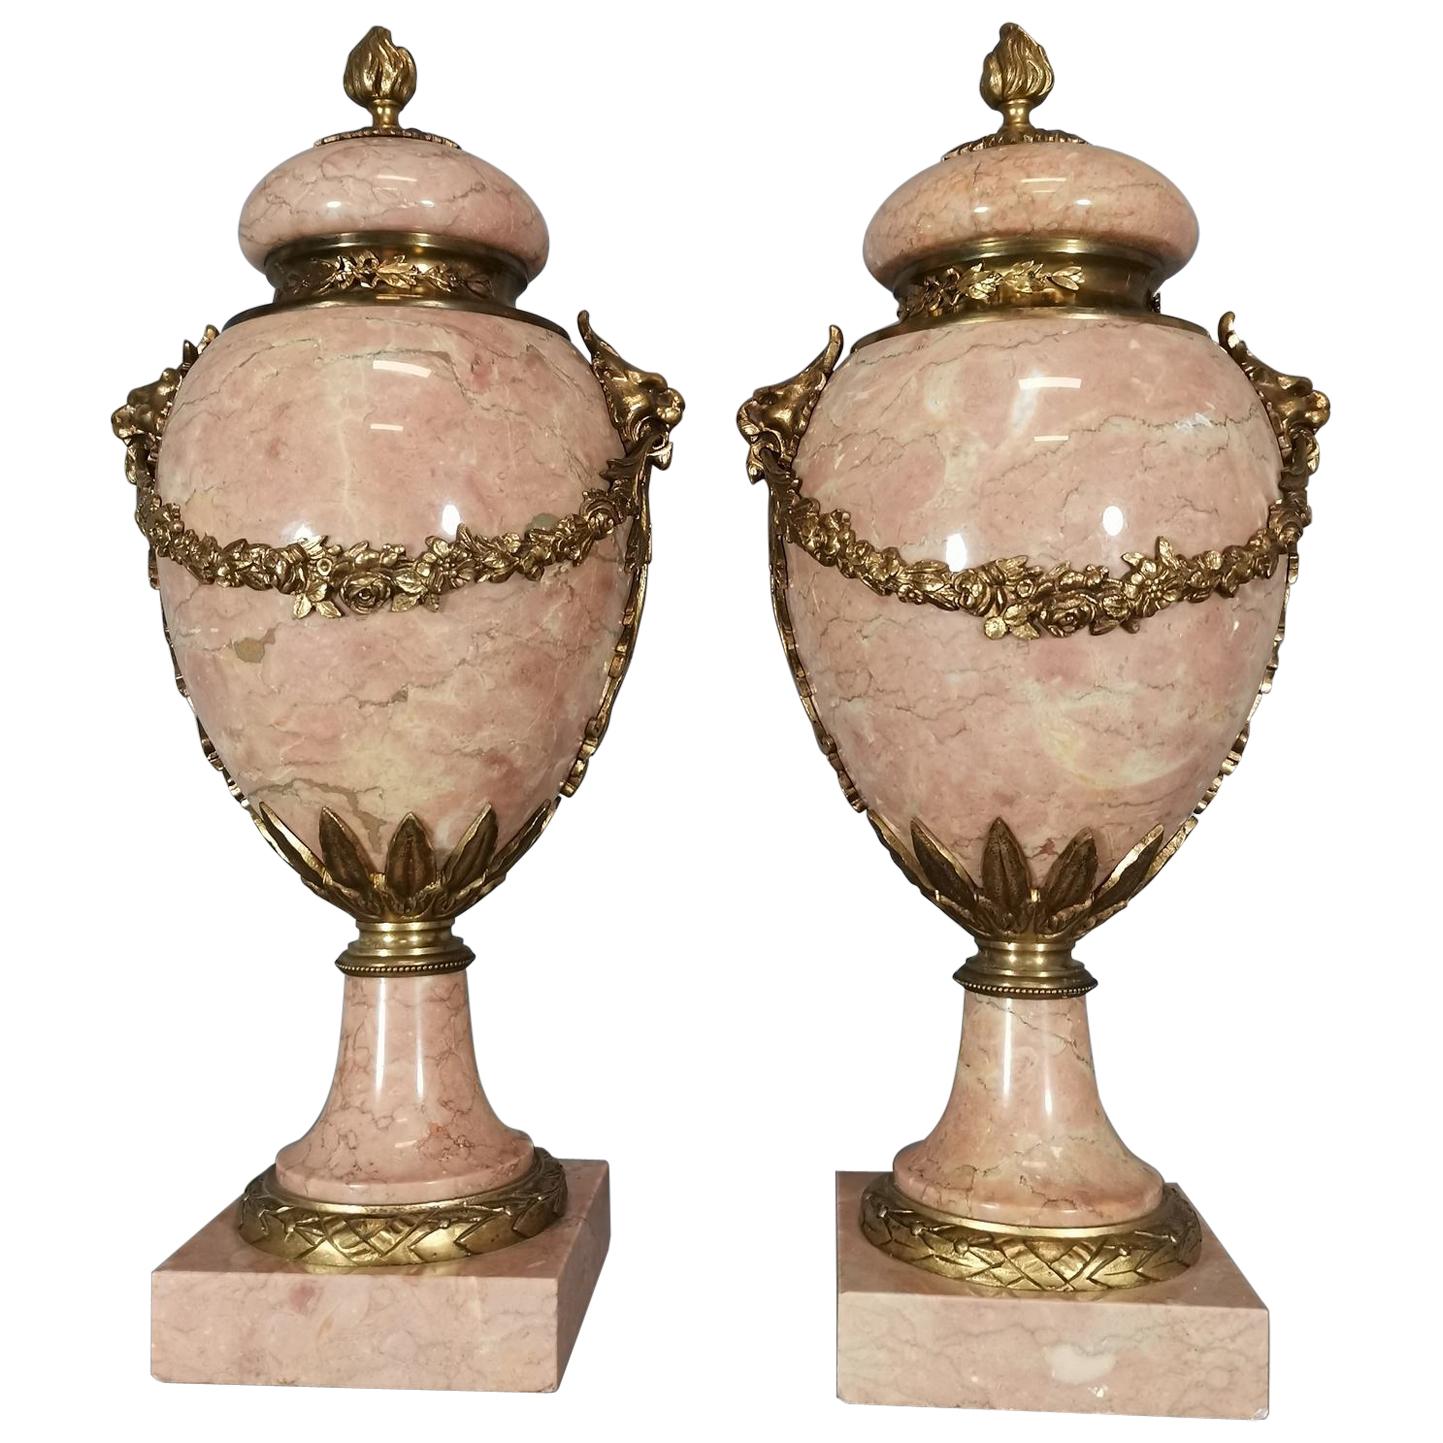 Pair of Marble and Gild Bronze Vase from the Early 1900, 20th Century For Sale